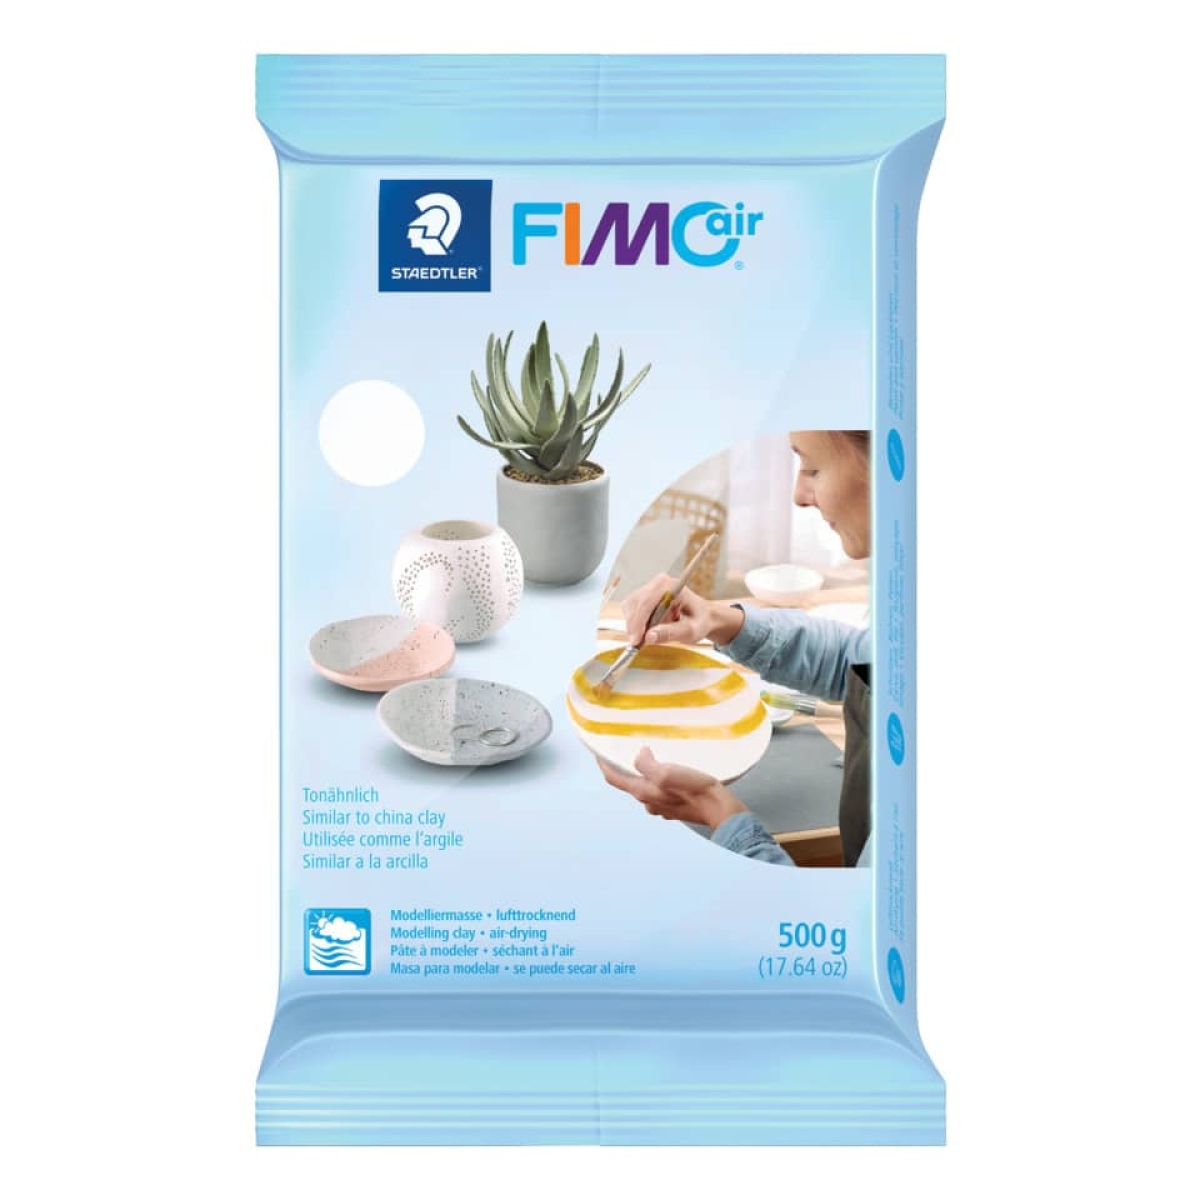 STAEDTLERModeling clay FIMO® air, 500 g, white 8100-0-Price for 0.5000 kgArticle-No: 4006608806484